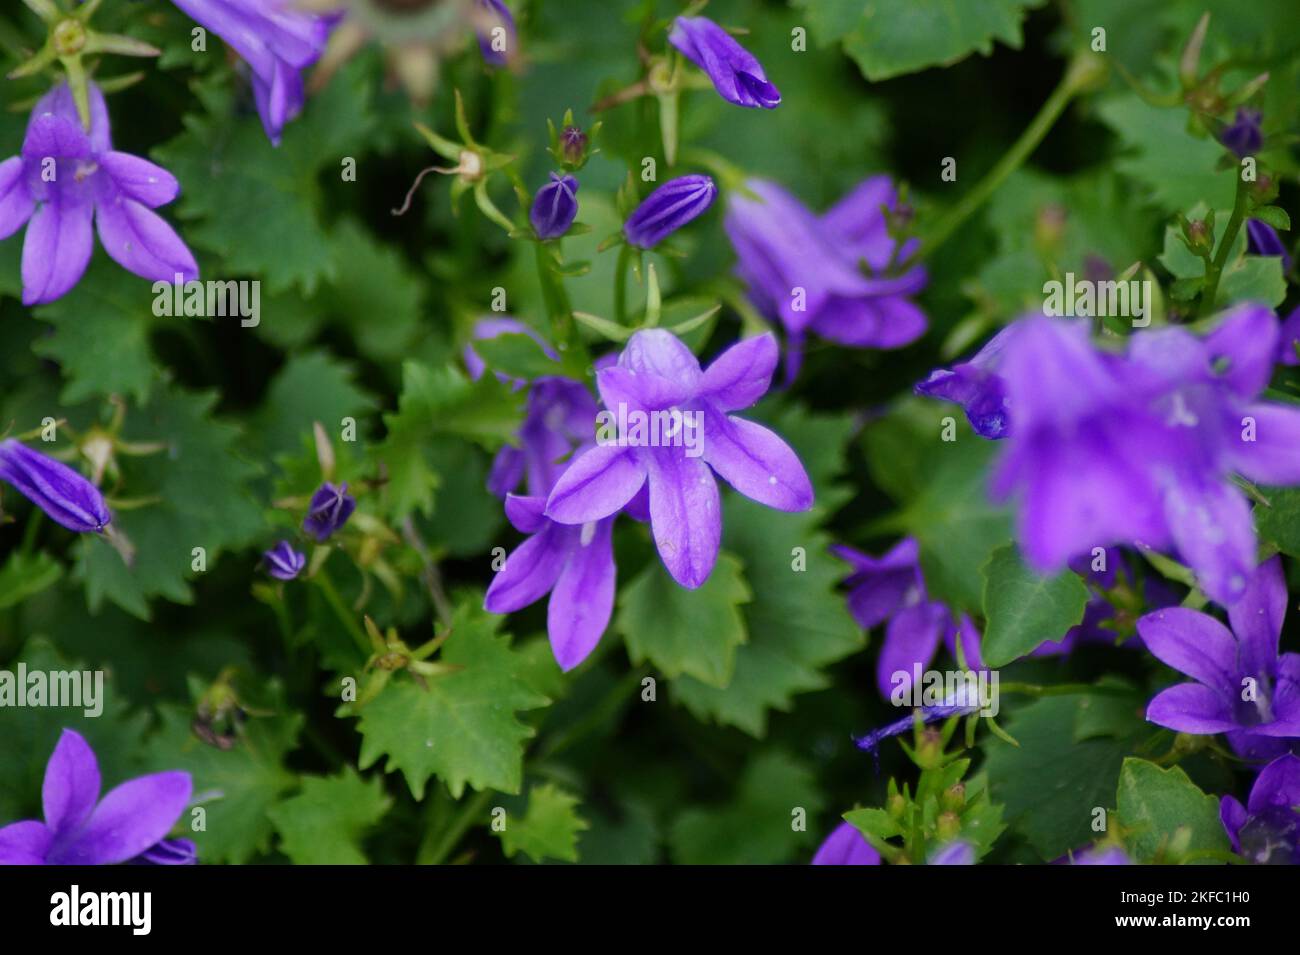 violet blossom of the dalmatian bell flower Stock Photo